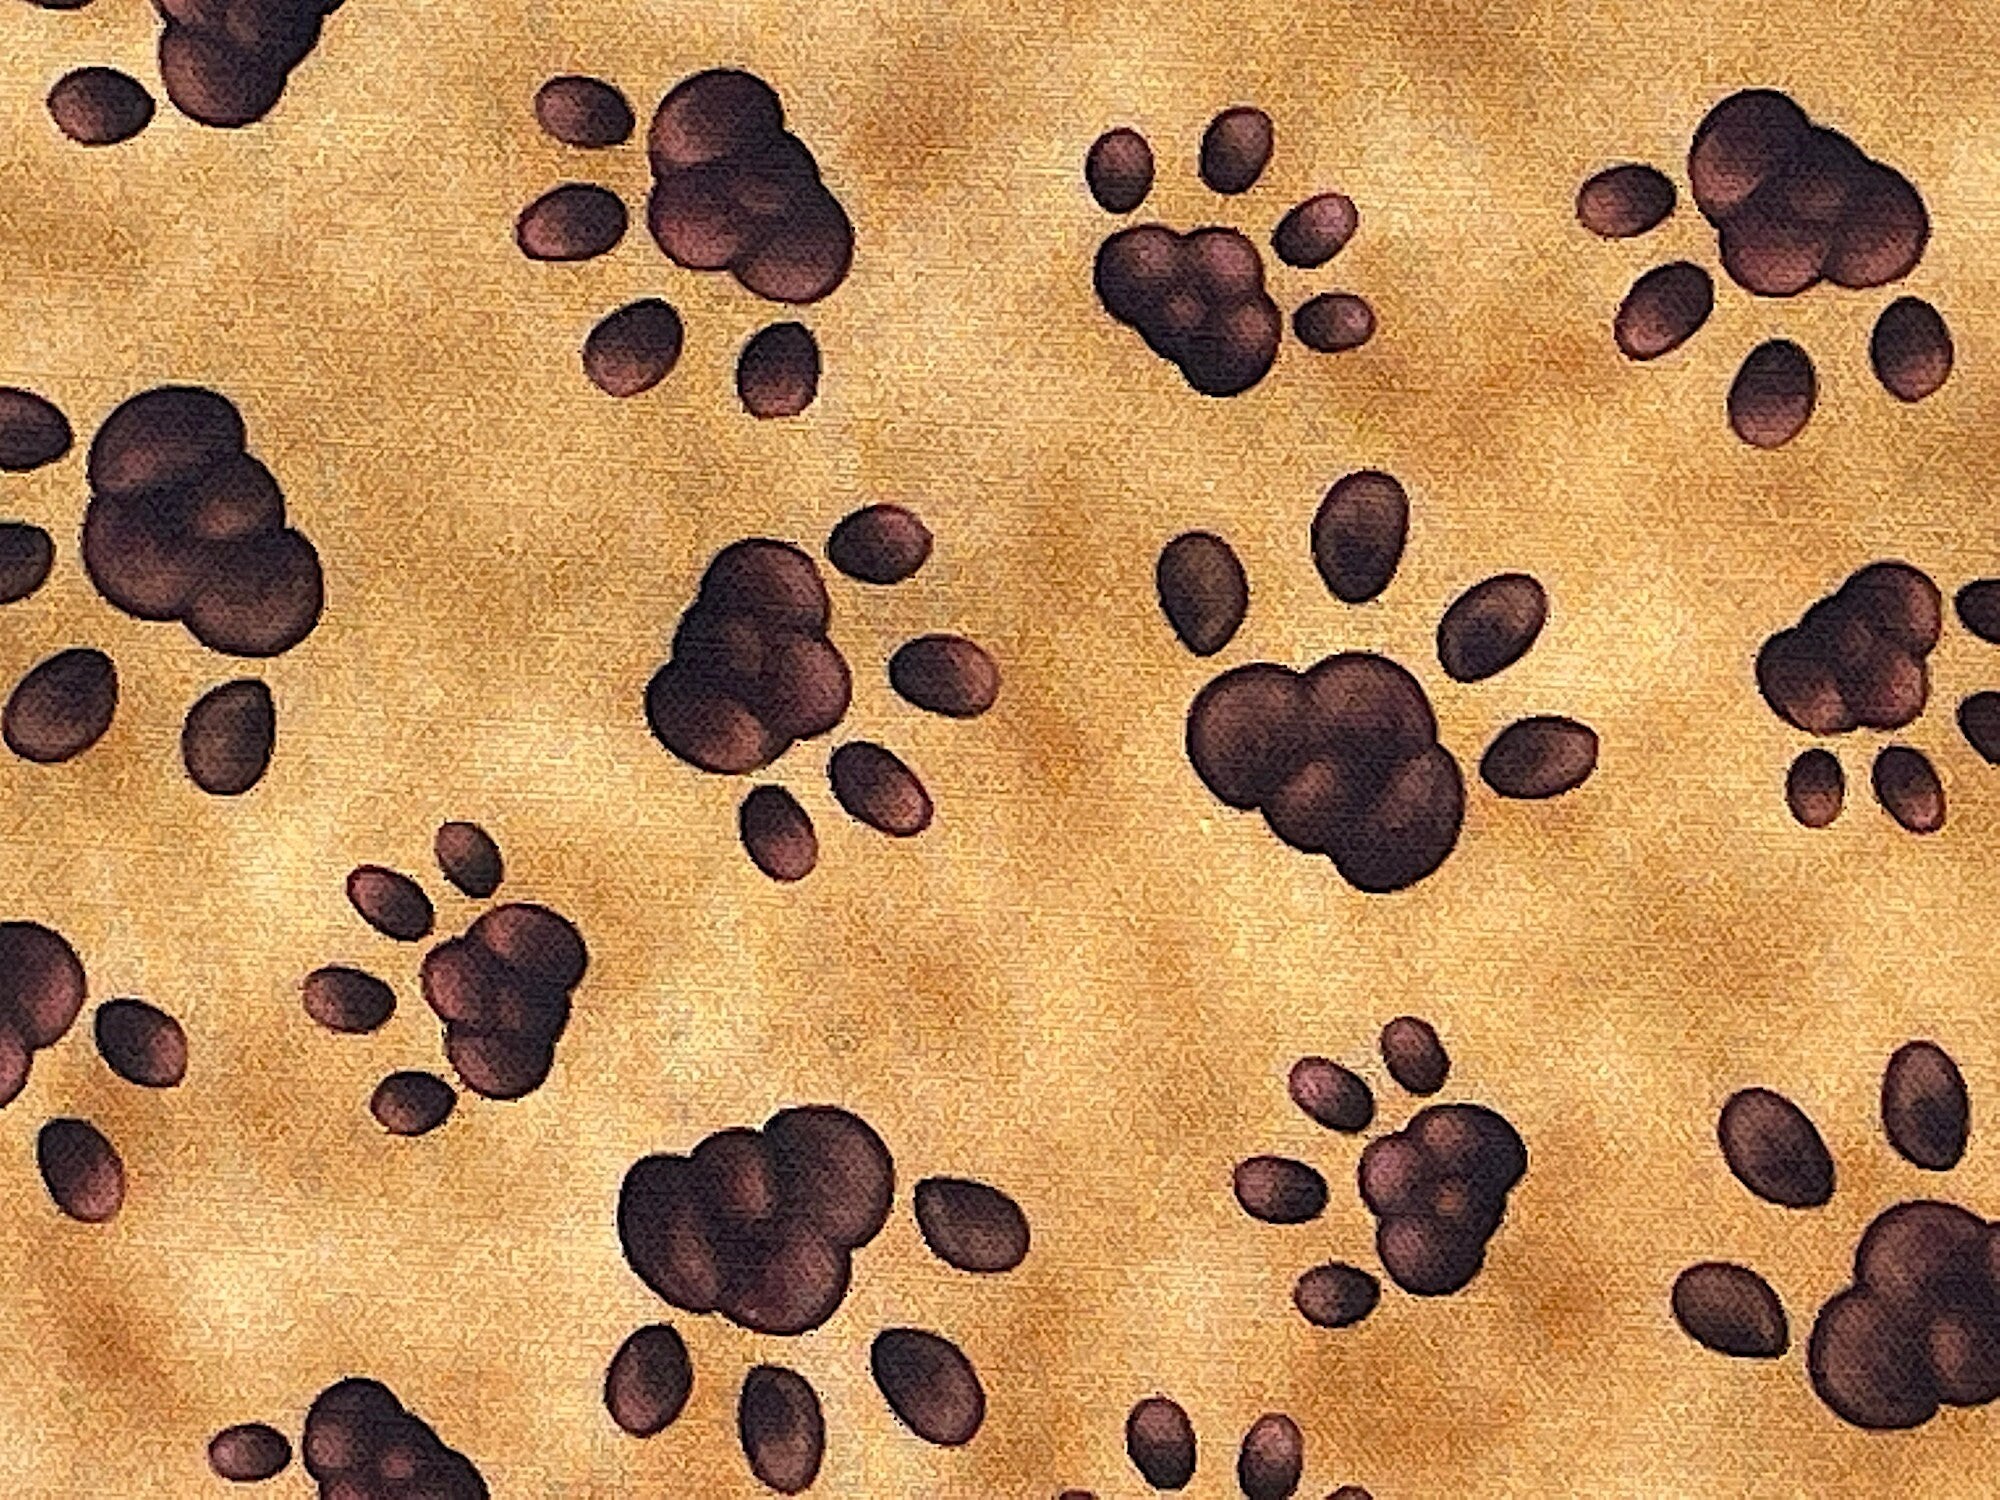 Brown paw prints on cotton fabric.